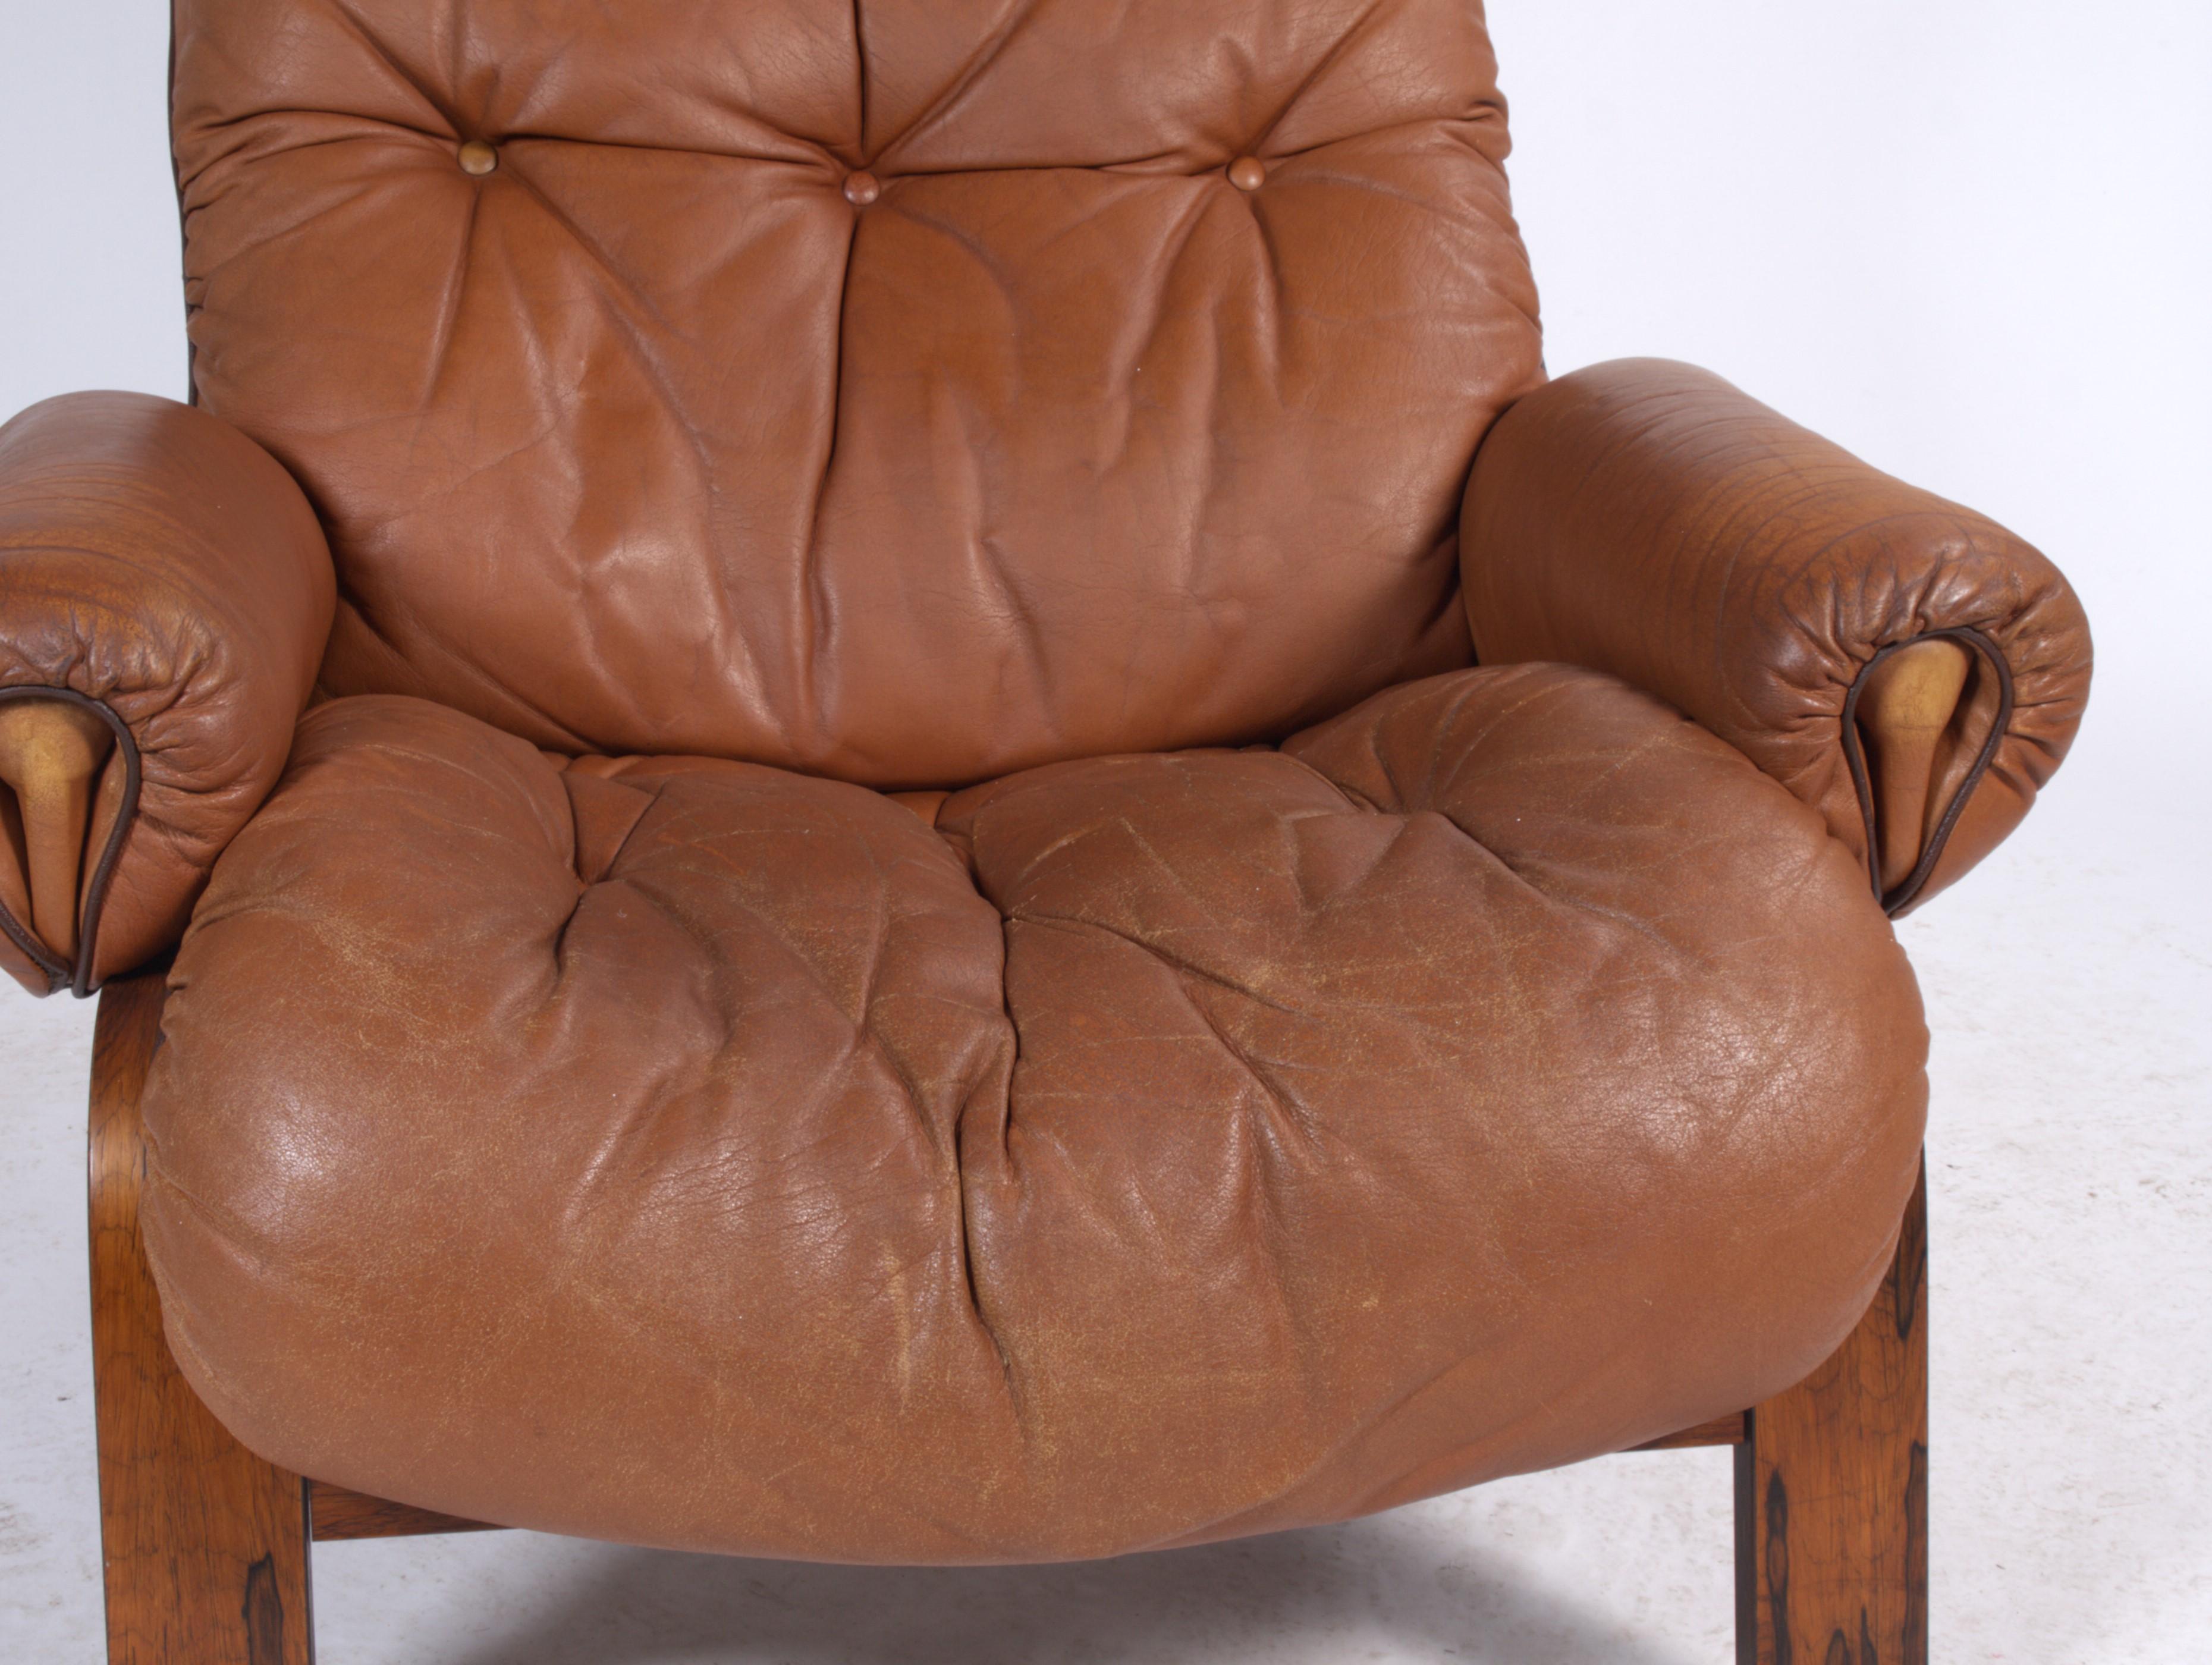 Late 20th Century Leather Lounge Chairs by Elsa Solheim & Nordahl Solheim for Rybo Rykken